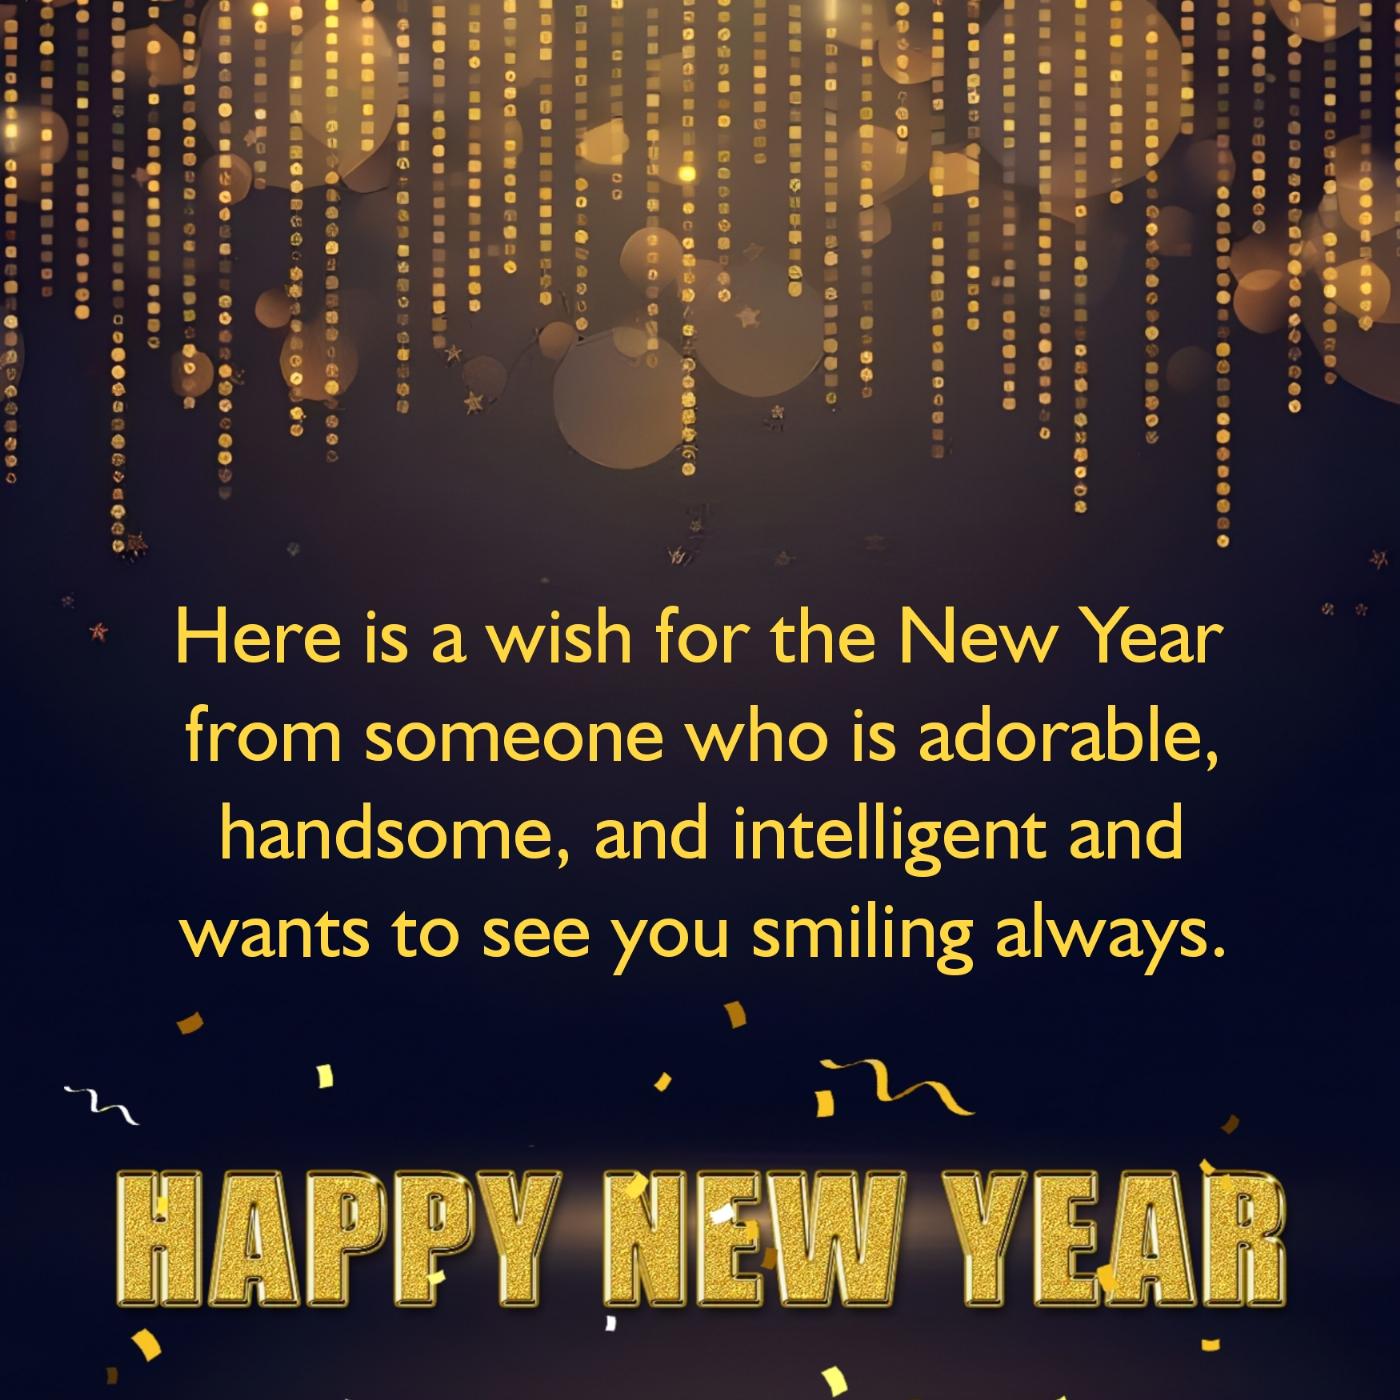 Here is a wish for the New Year from someone